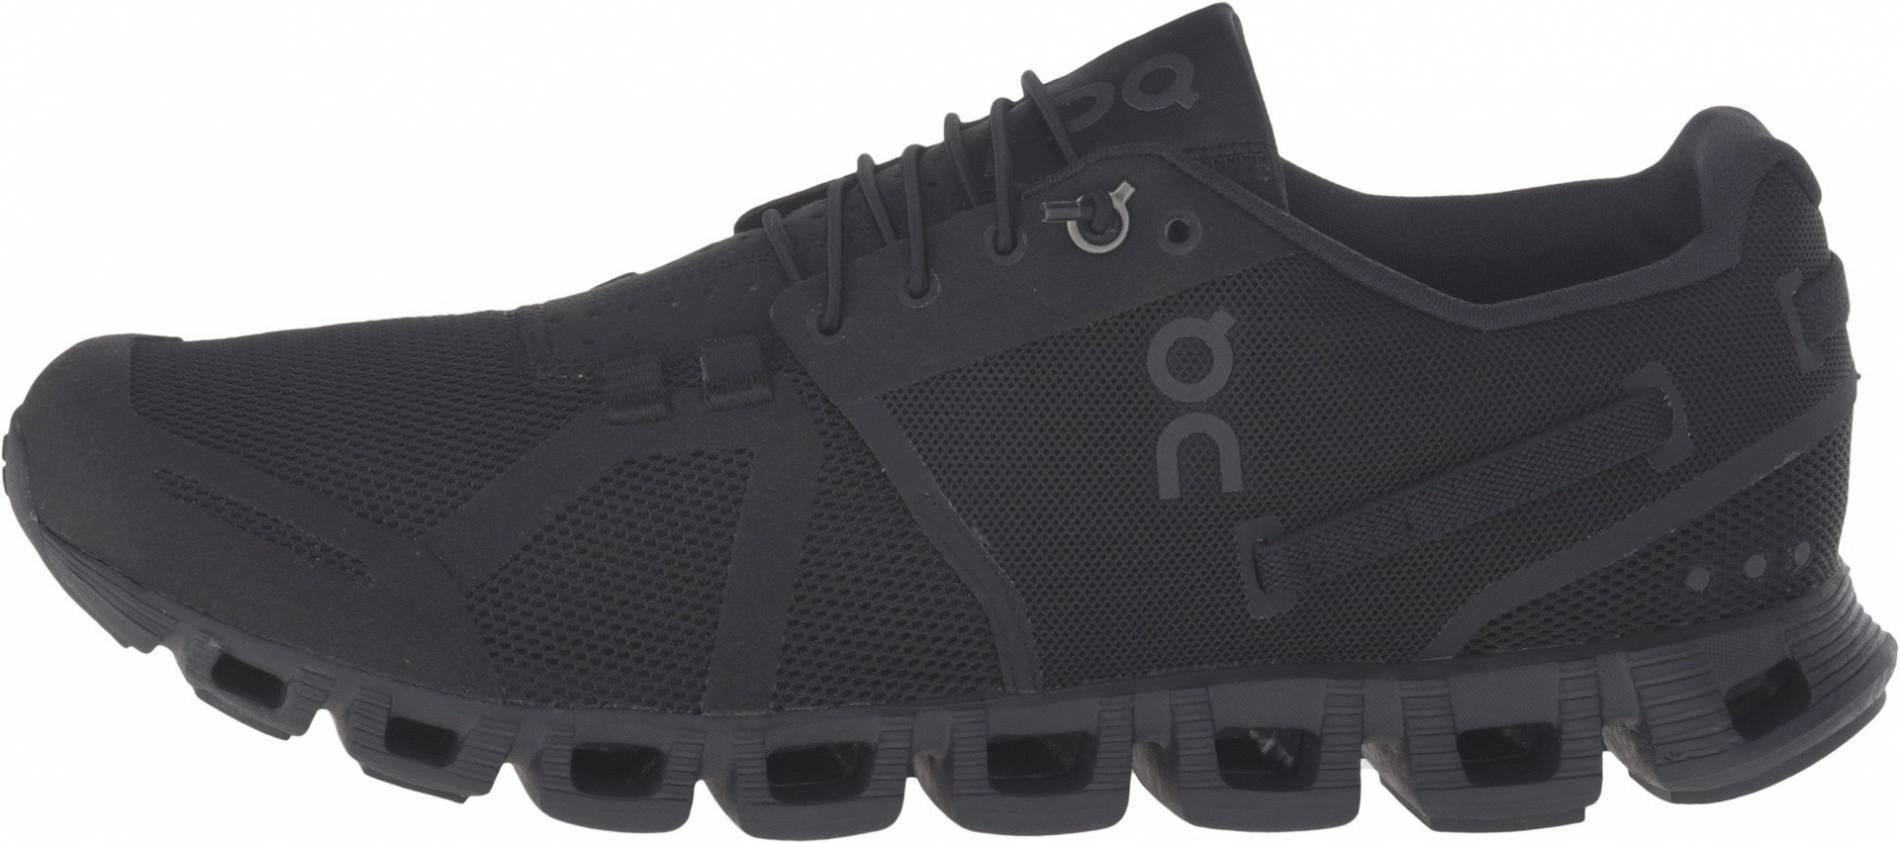 discount on cloud running shoes